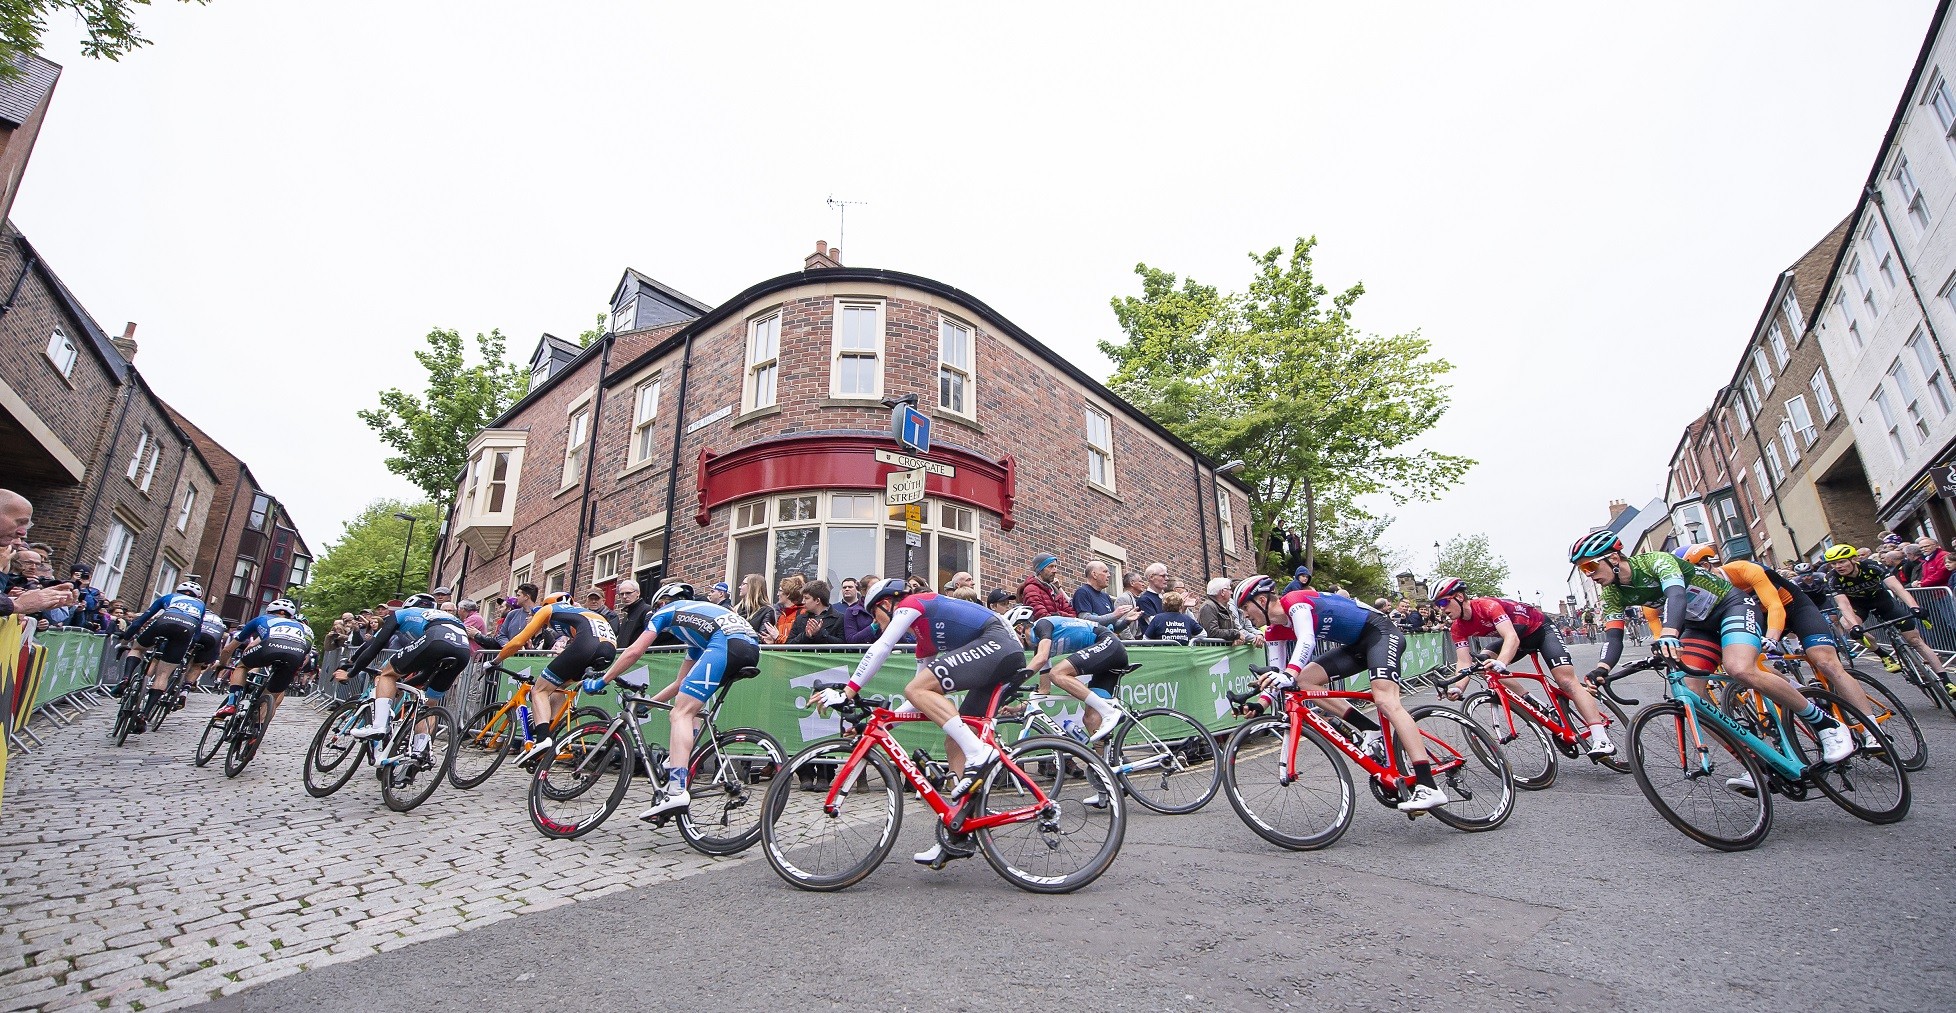 Durham Gears Up for Cycling Fever as Tour Series Returns